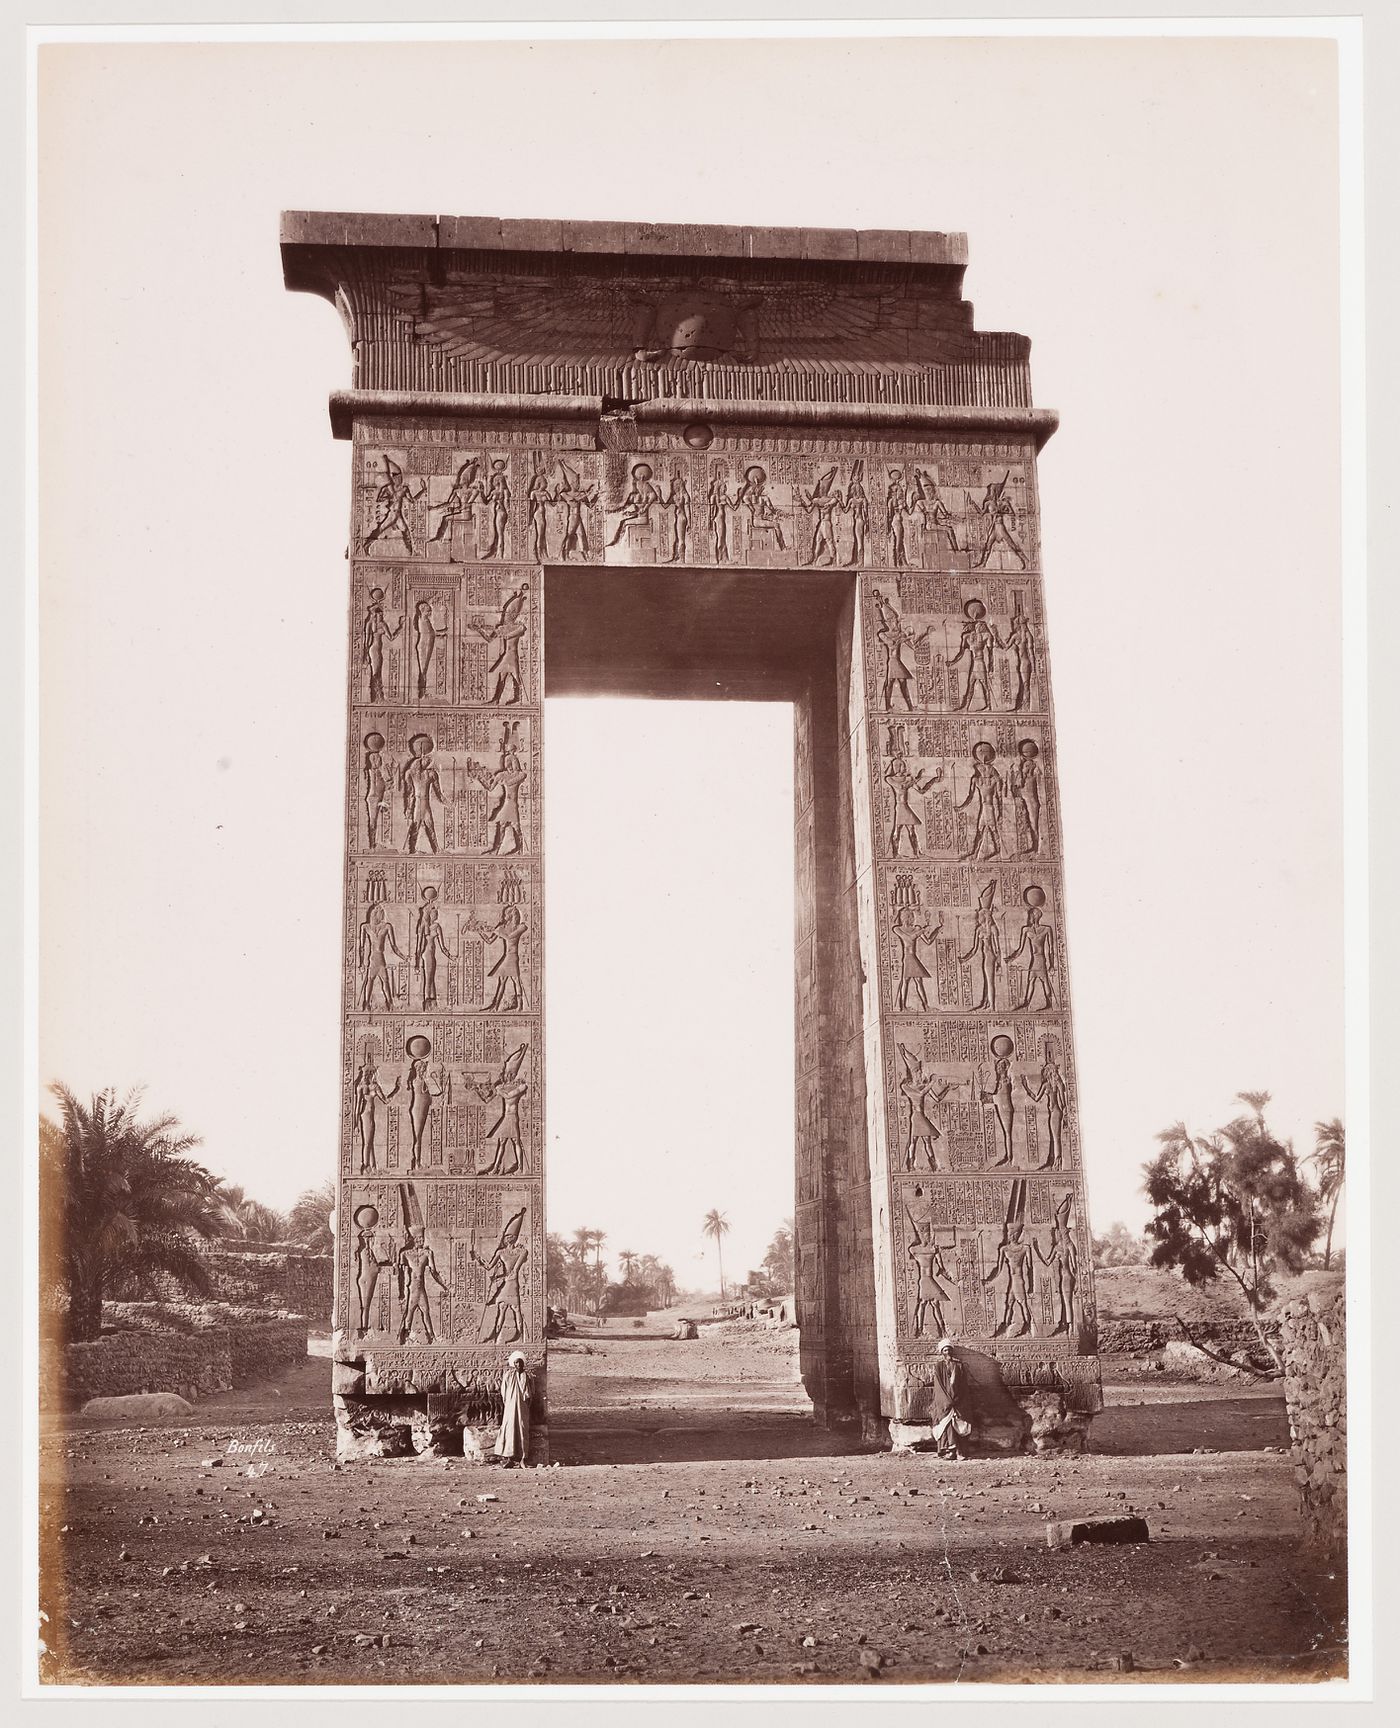 North portal, Temple of Rameses, Karnak, Thebes, Egypt